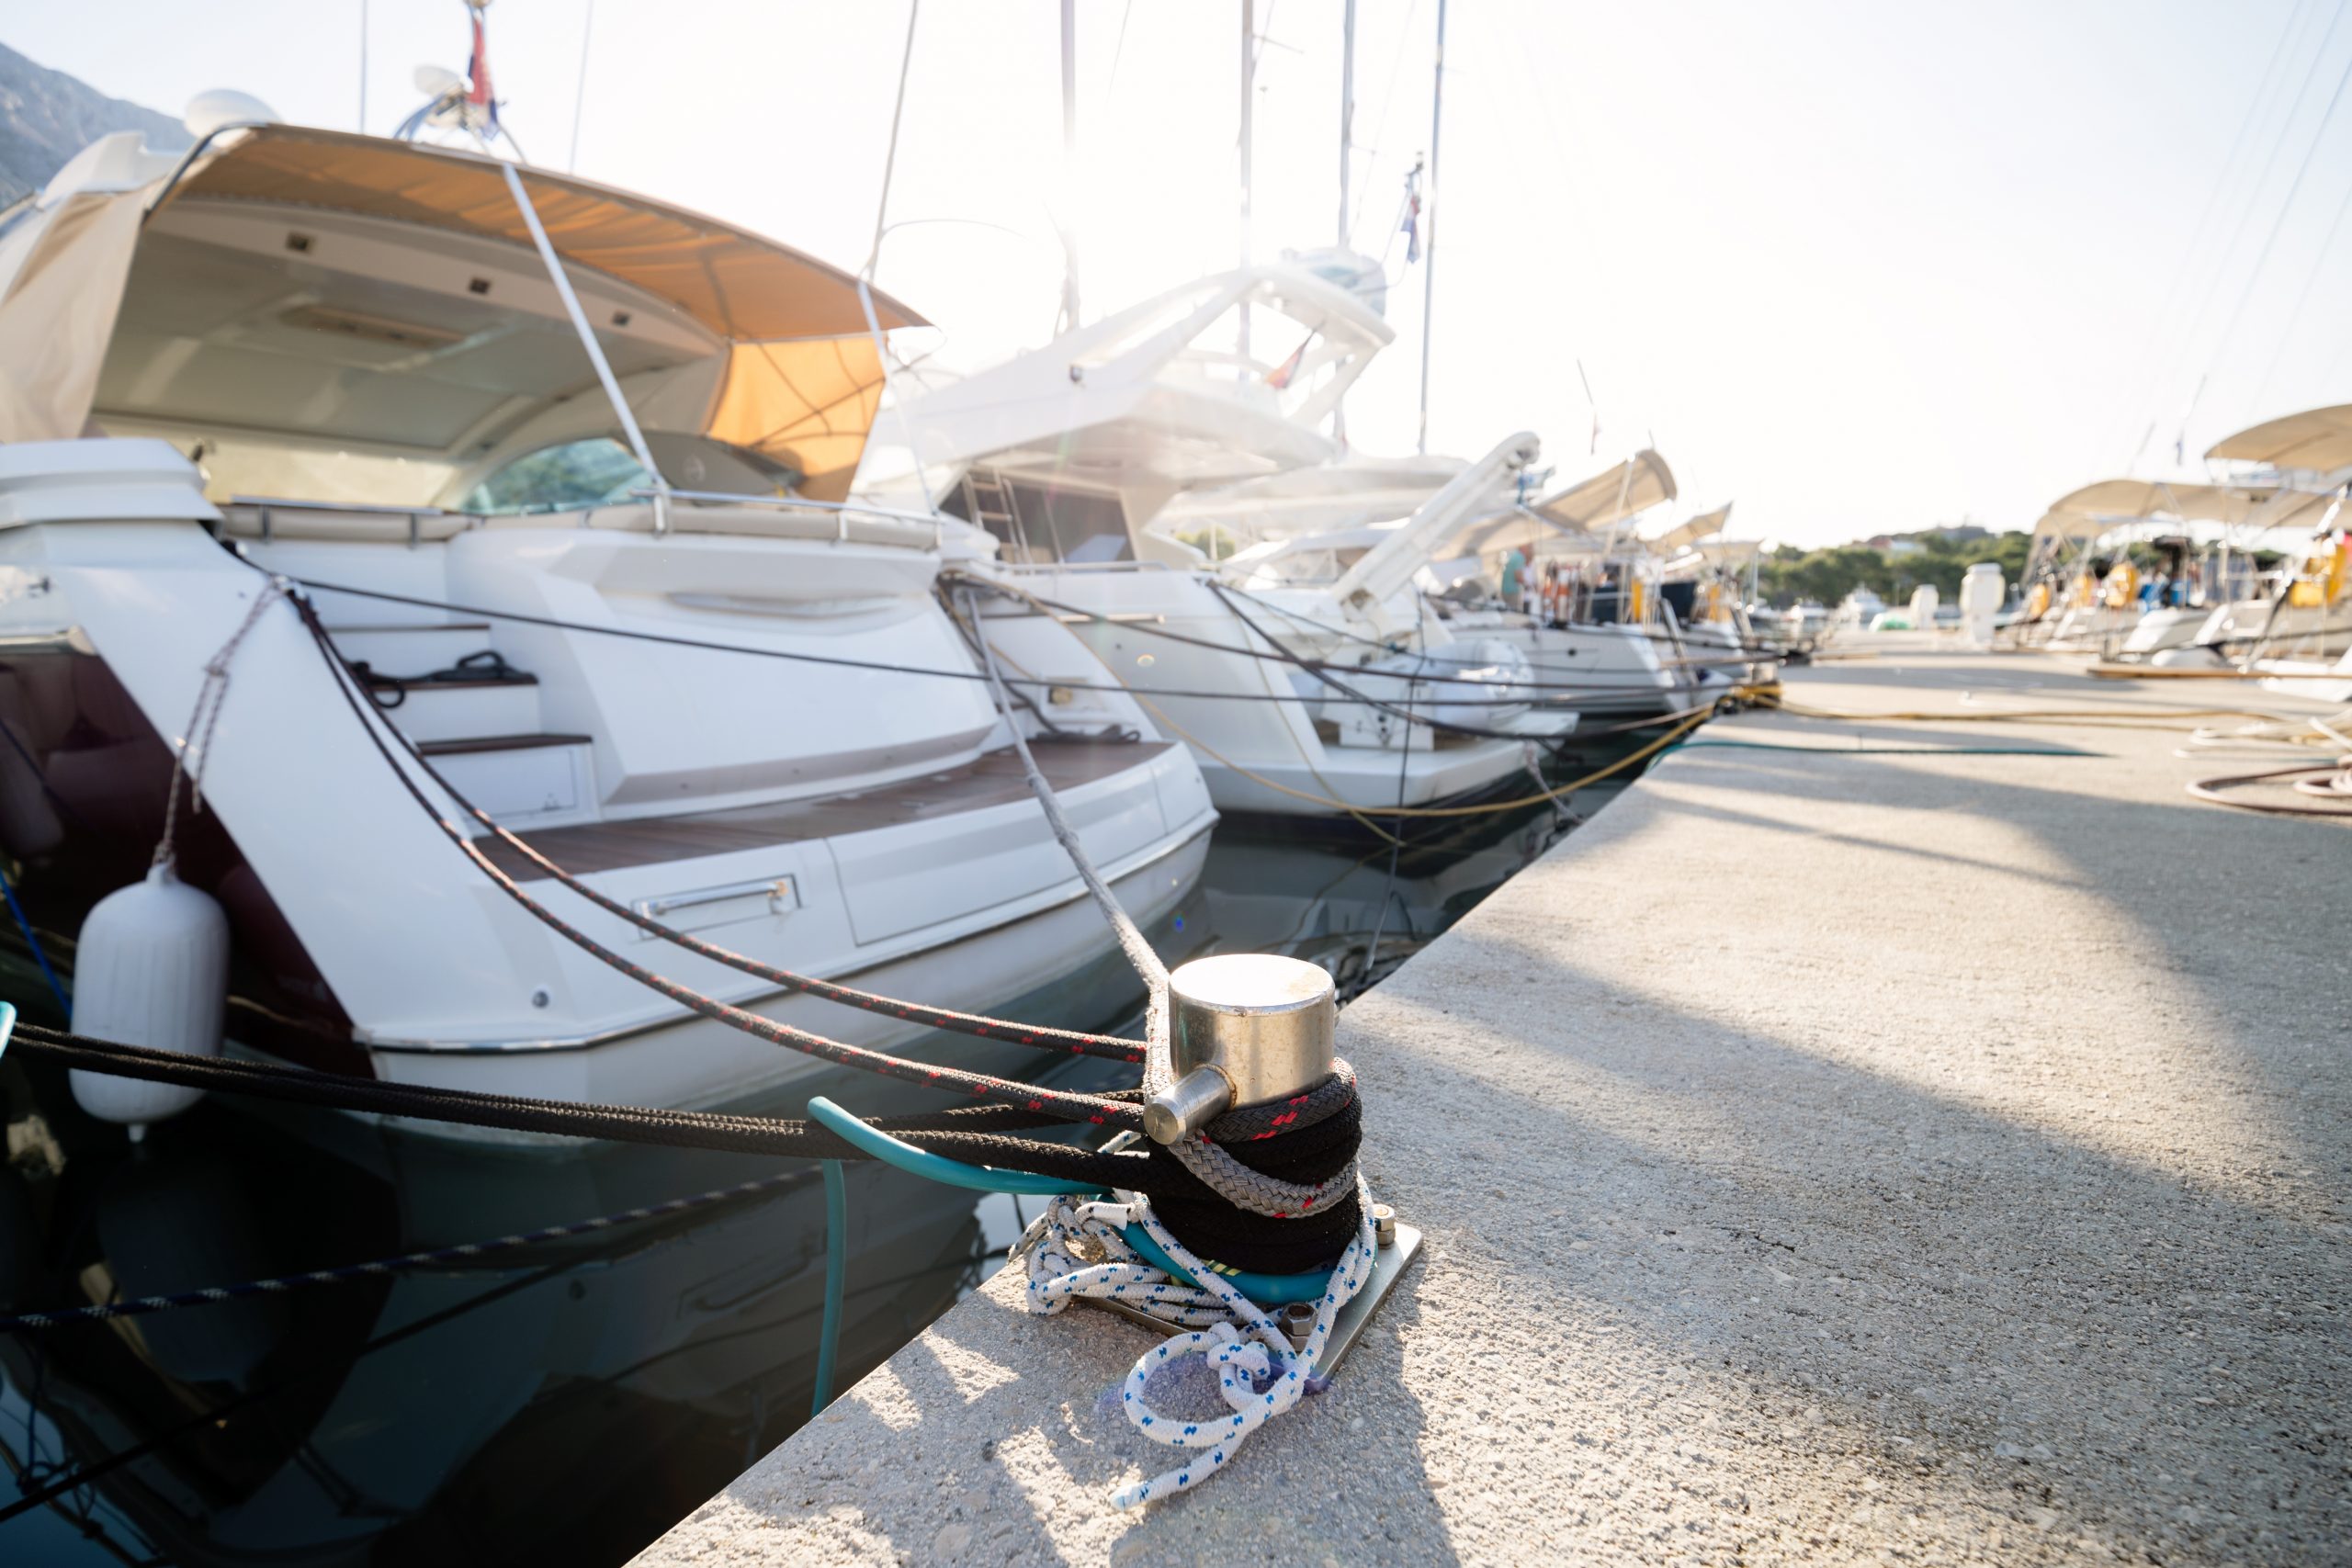 Why Should You Use a Yacht Broker When Buying or Selling Your Yacht?